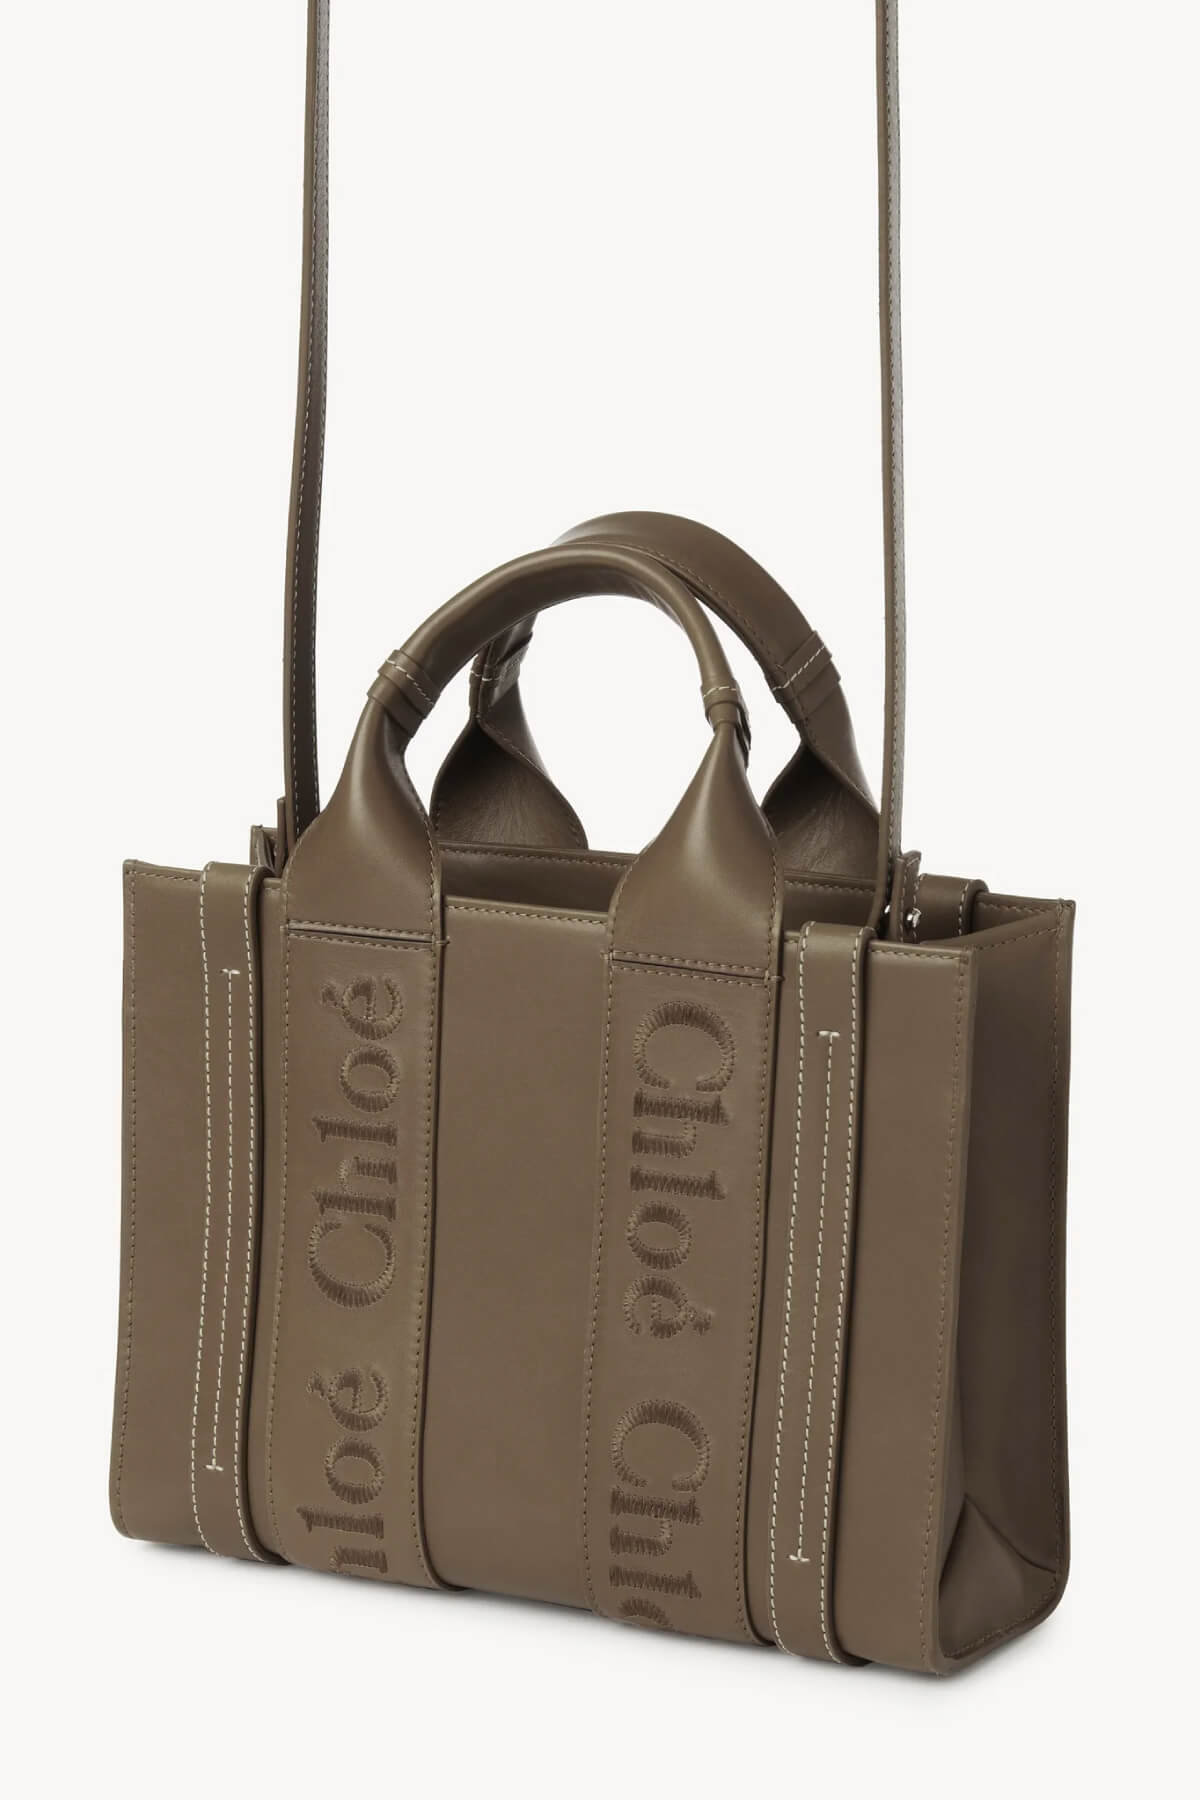 Chloé Small Woody Leather Tote Bag - Army Green